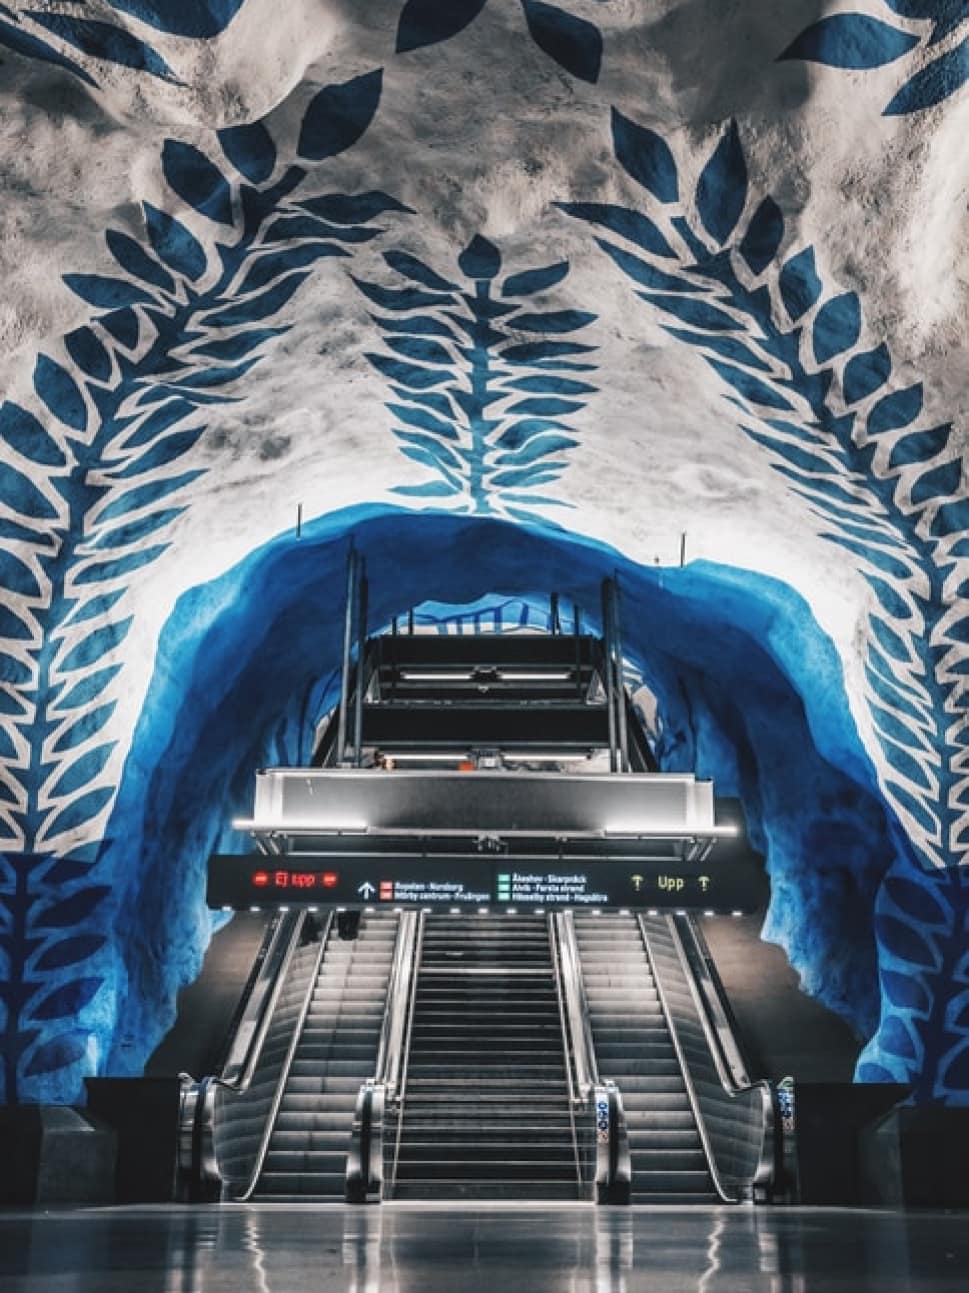 Elevators in a train station in Stockholm with incredible blue, floral mural on the ceiling